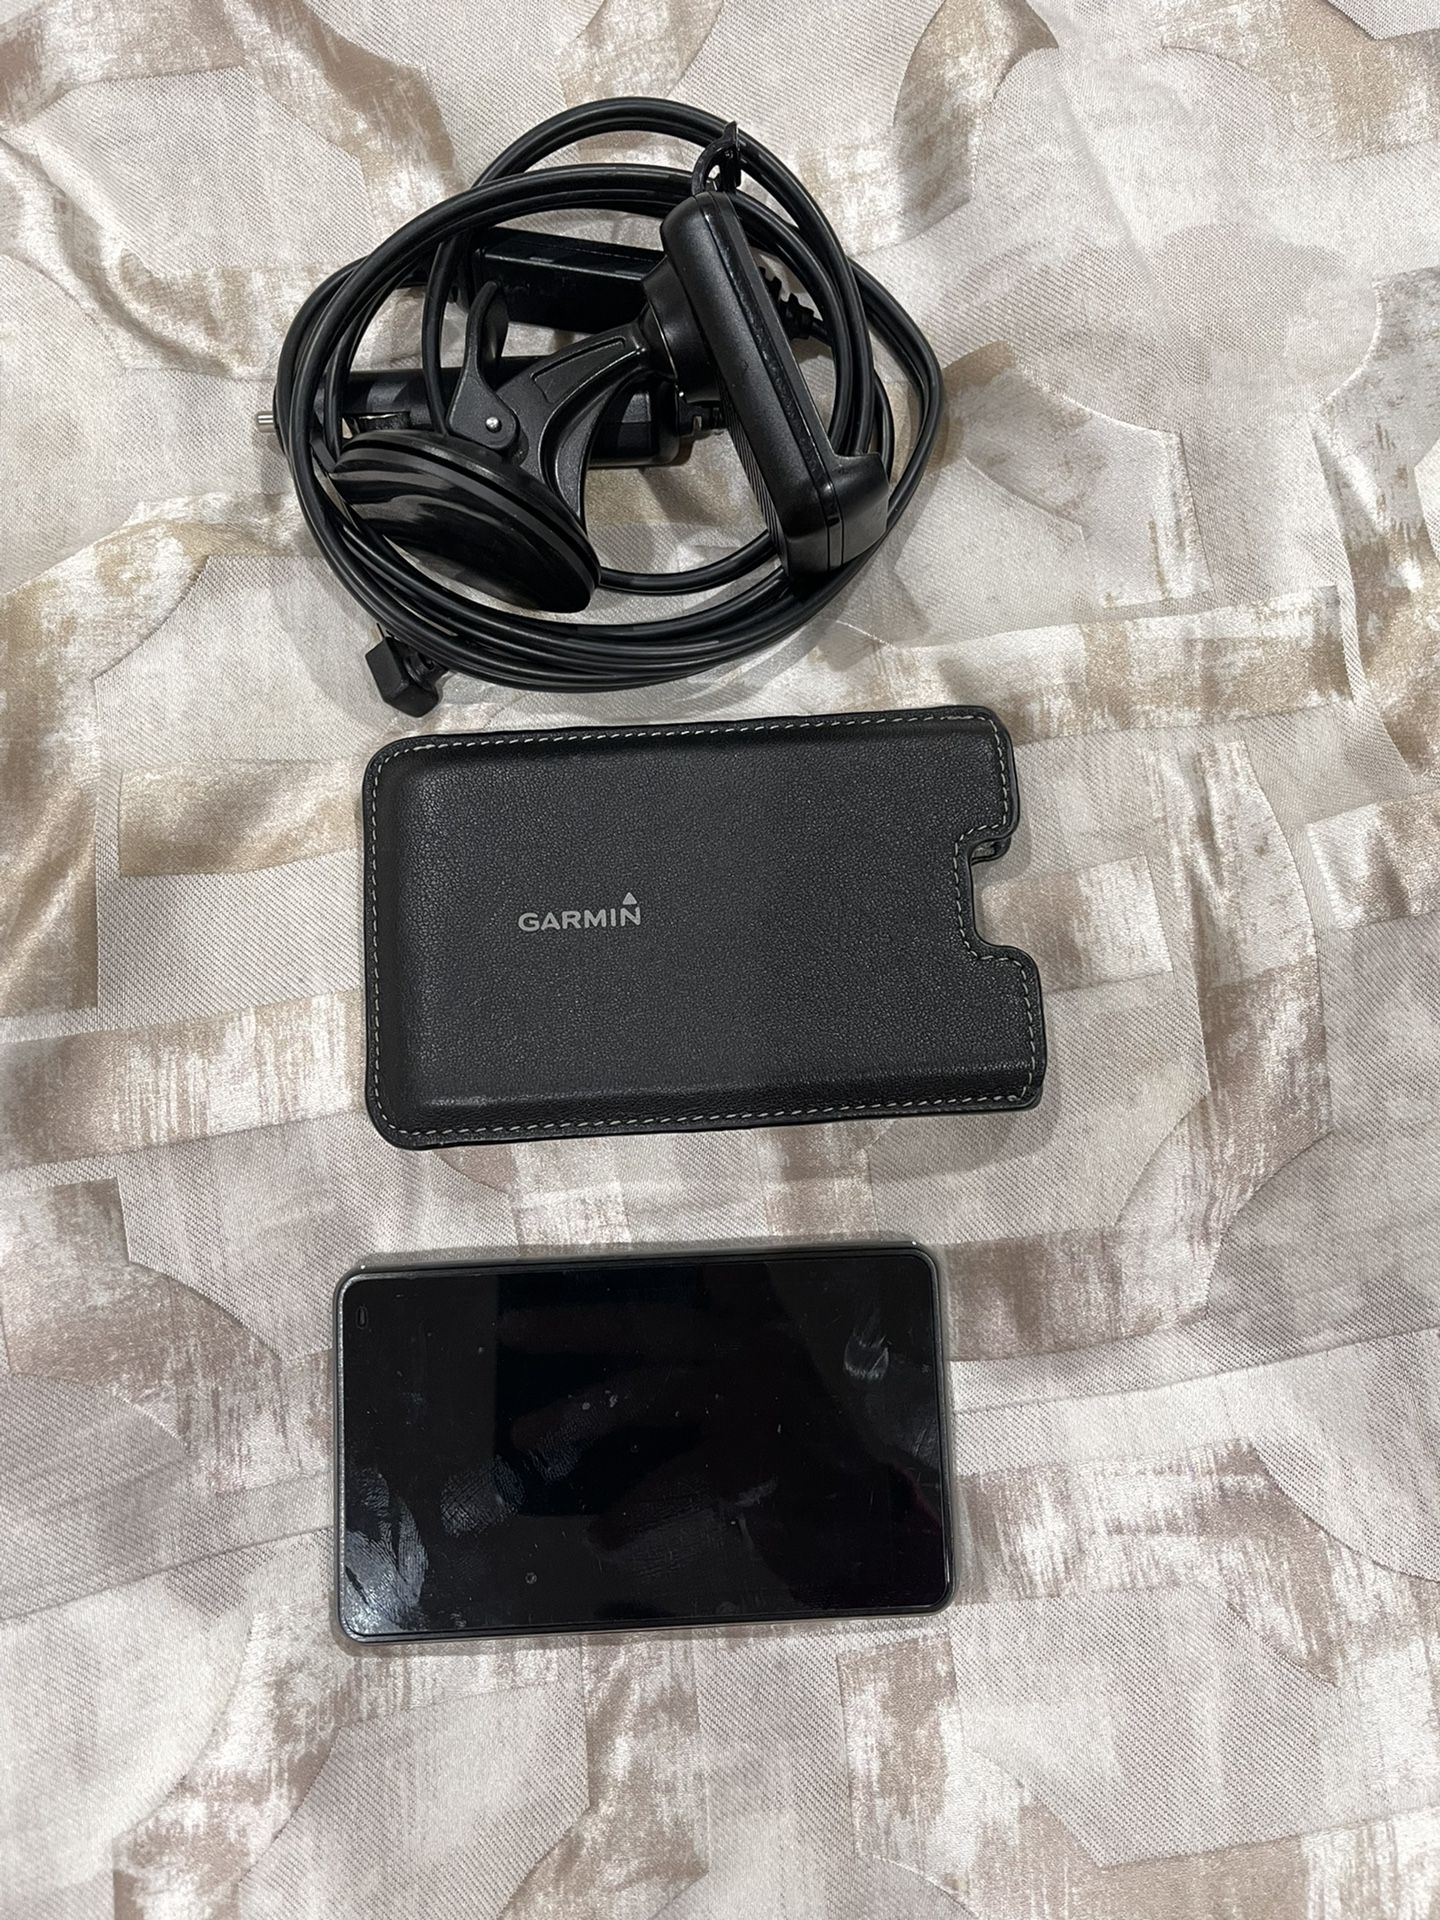 Nuvi 3760 GPS for Sale in PA - OfferUp